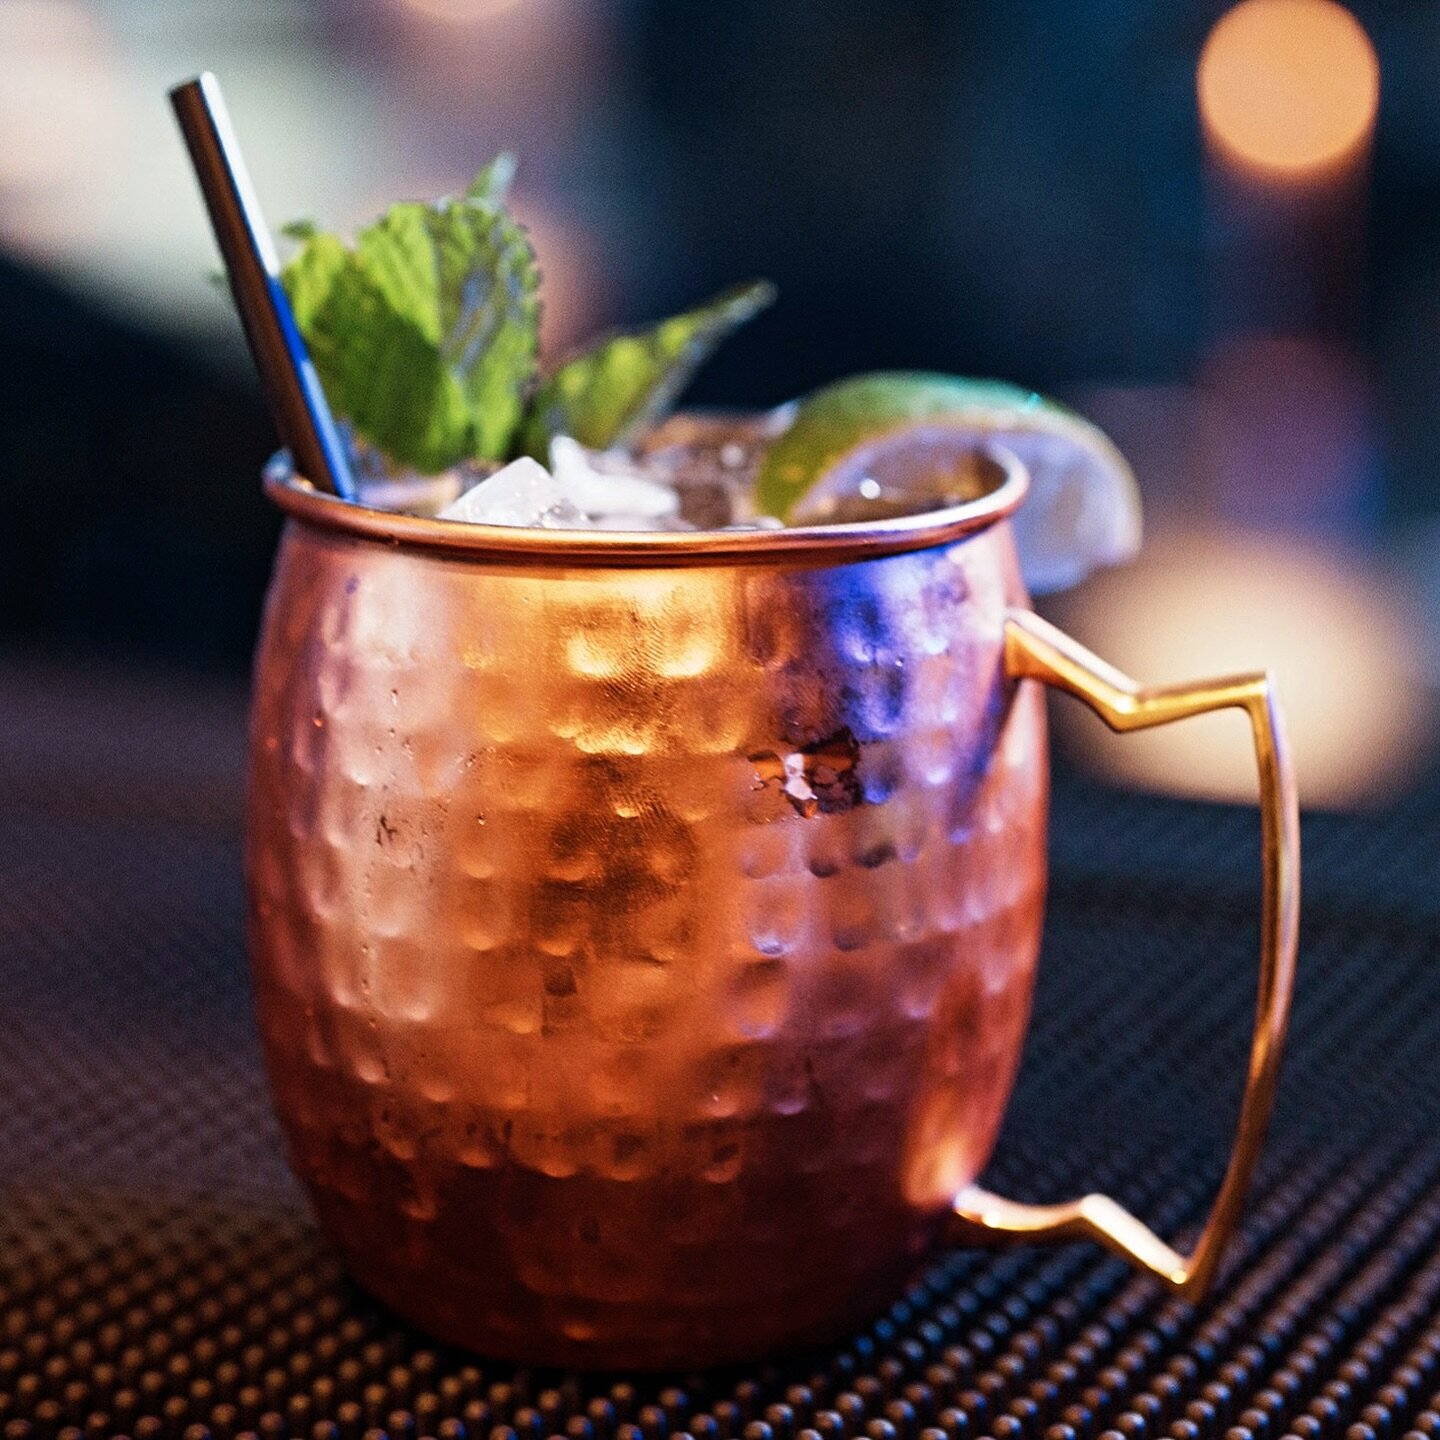 The Moscow Mule 🫚 - It hits the right notes.

#ClassicCafeAndLounge